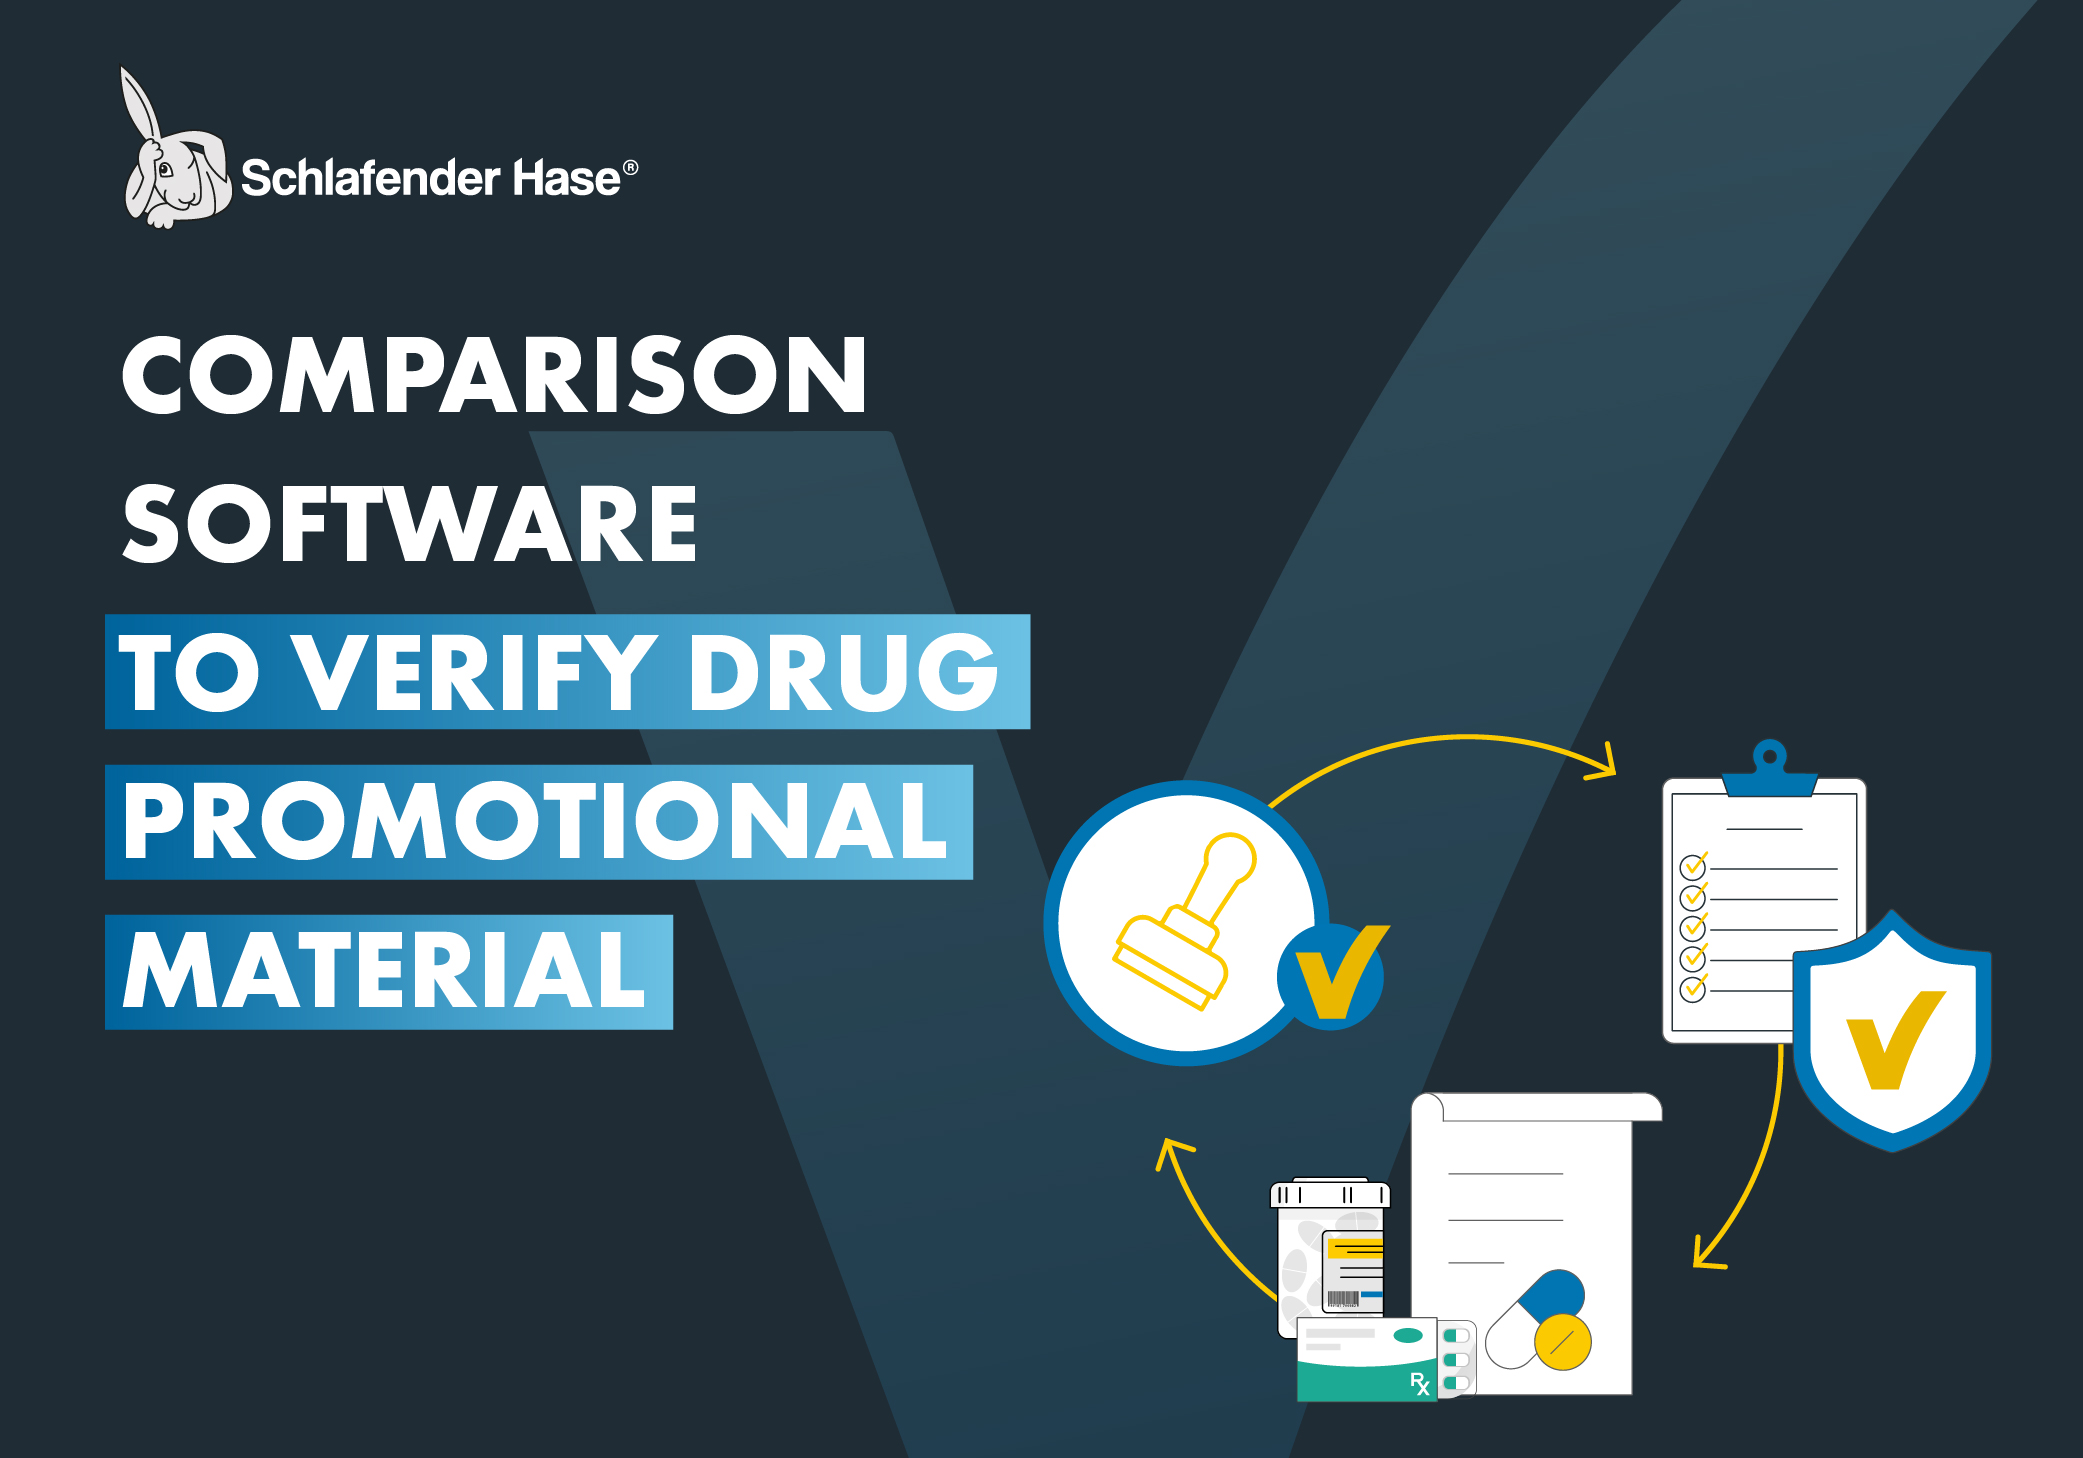 Comparison Software to Verify Drug Promotional Material